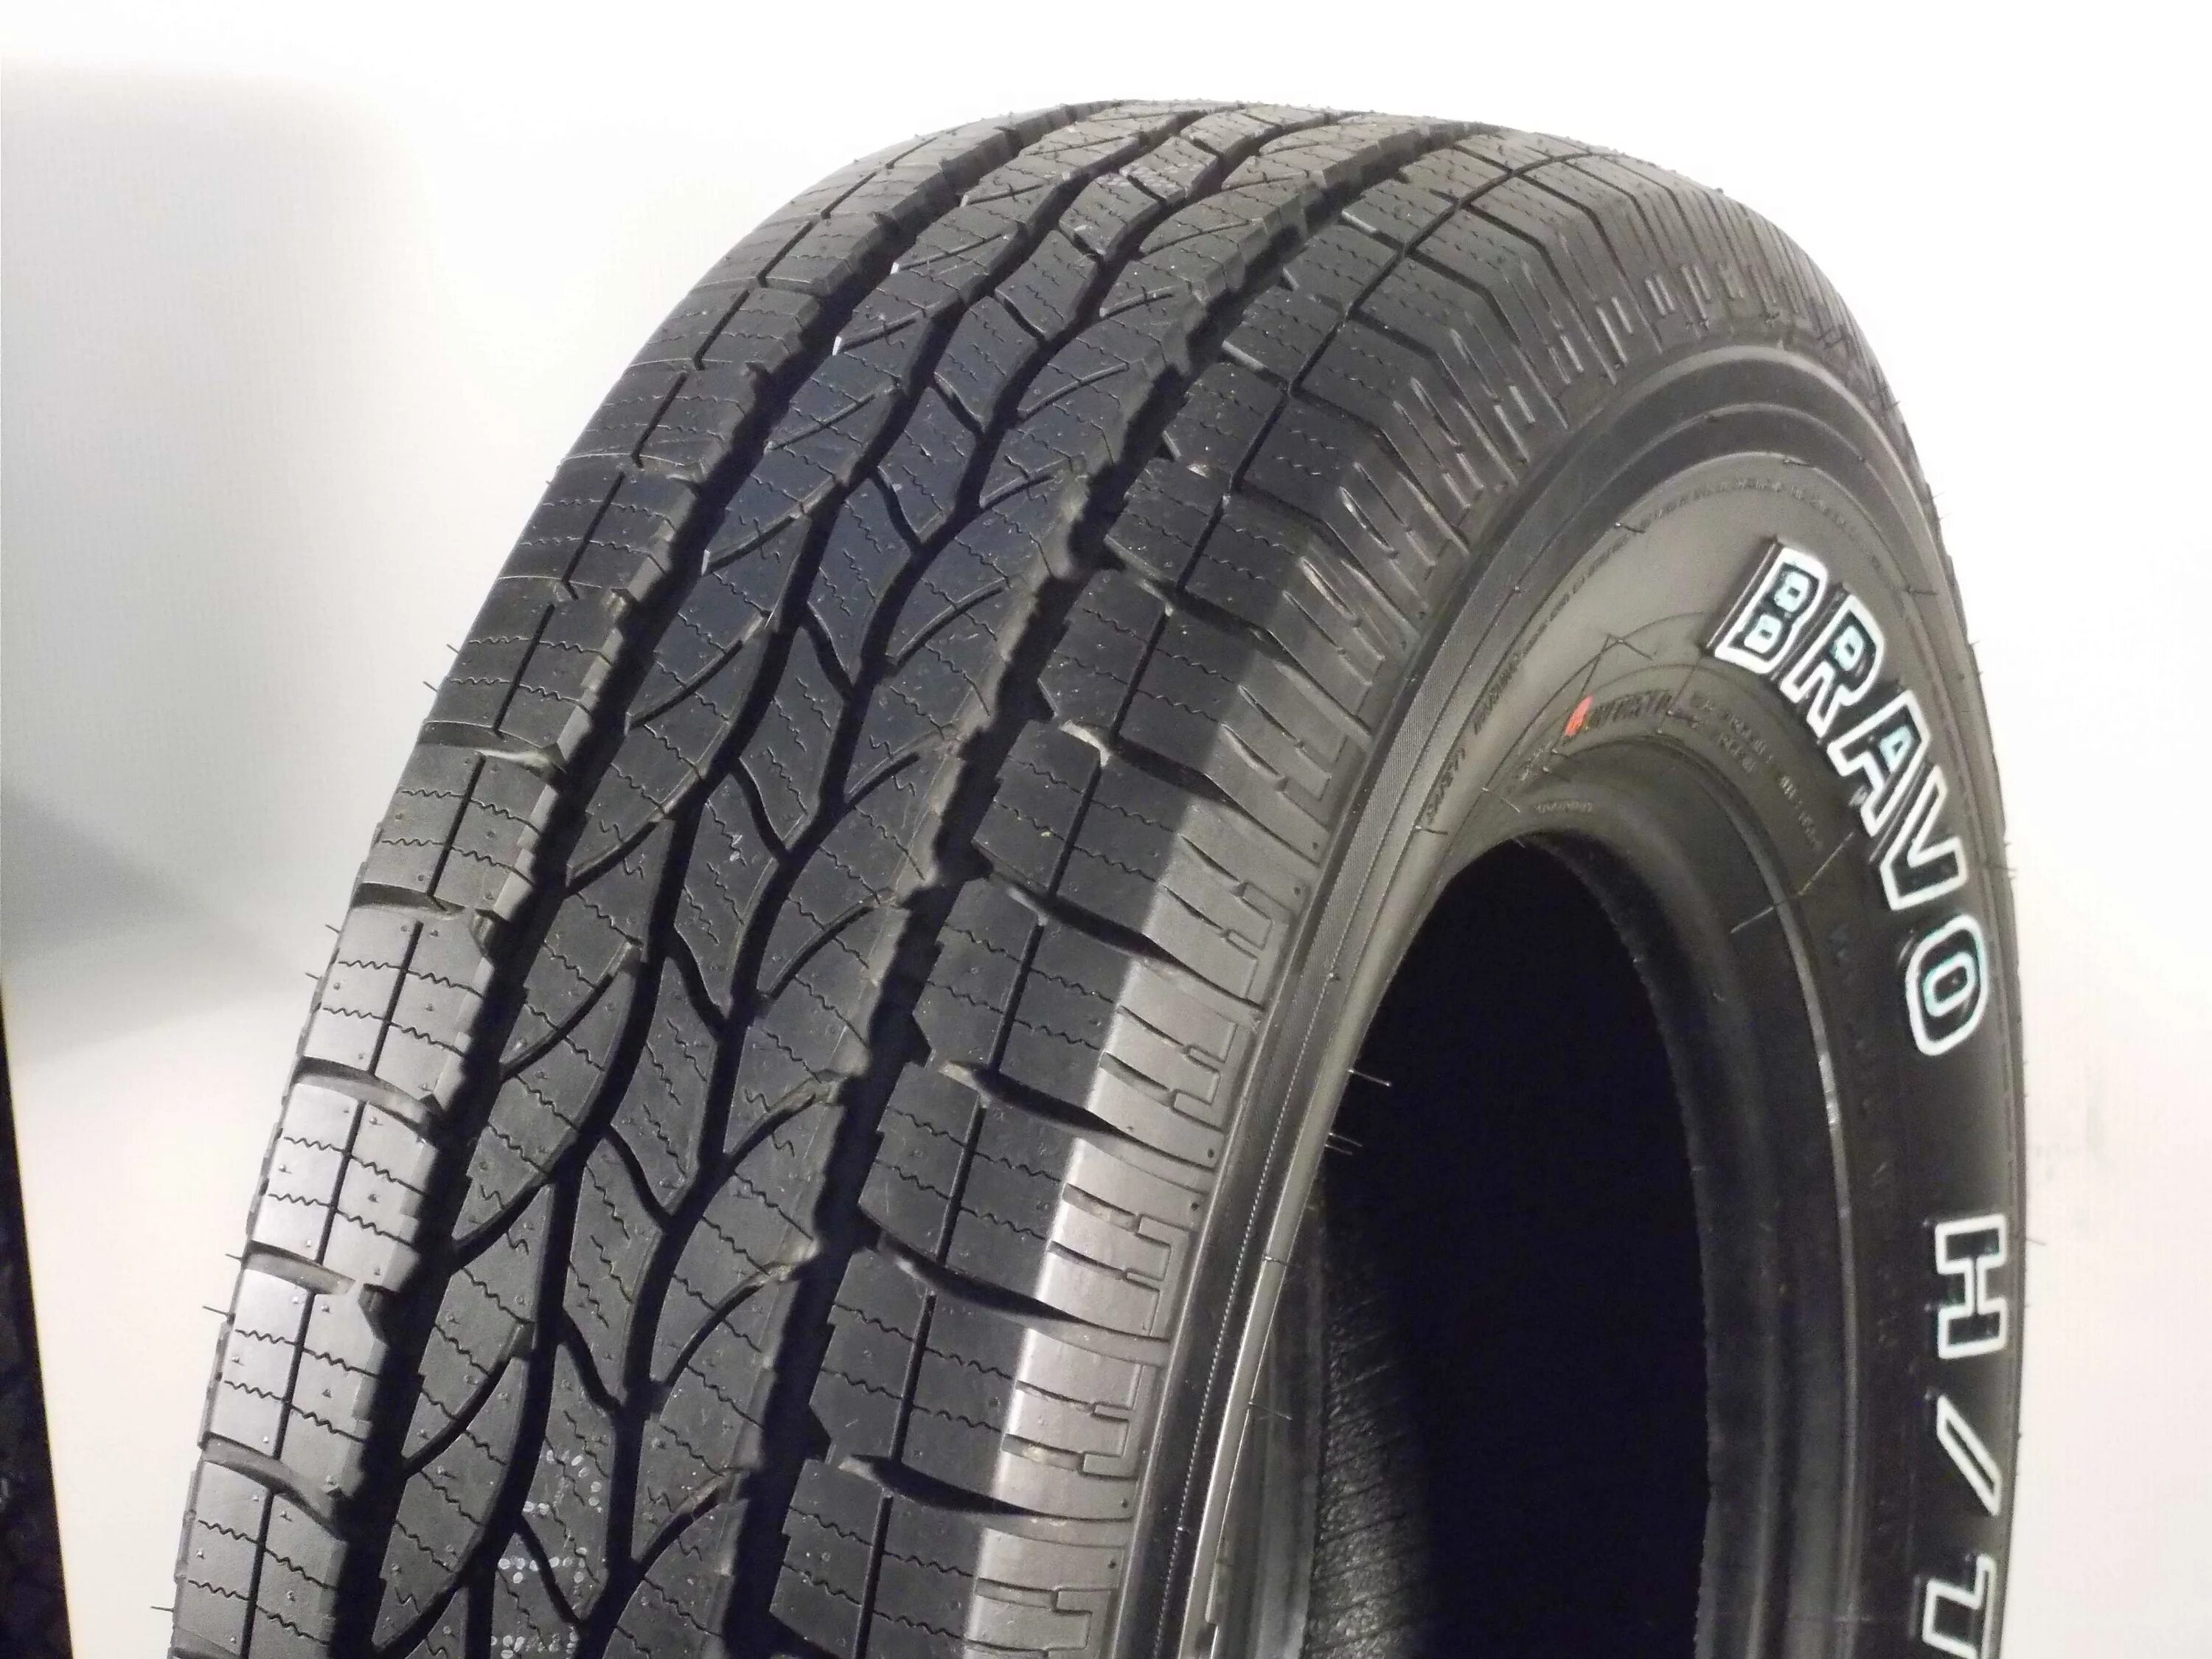 Maxxis HT-770 Bravo. Maxxis ht770 Bravo 265/60r18. 235/70r16 Maxxis Bravo HT-770 106t. Максис Браво АТ 770.